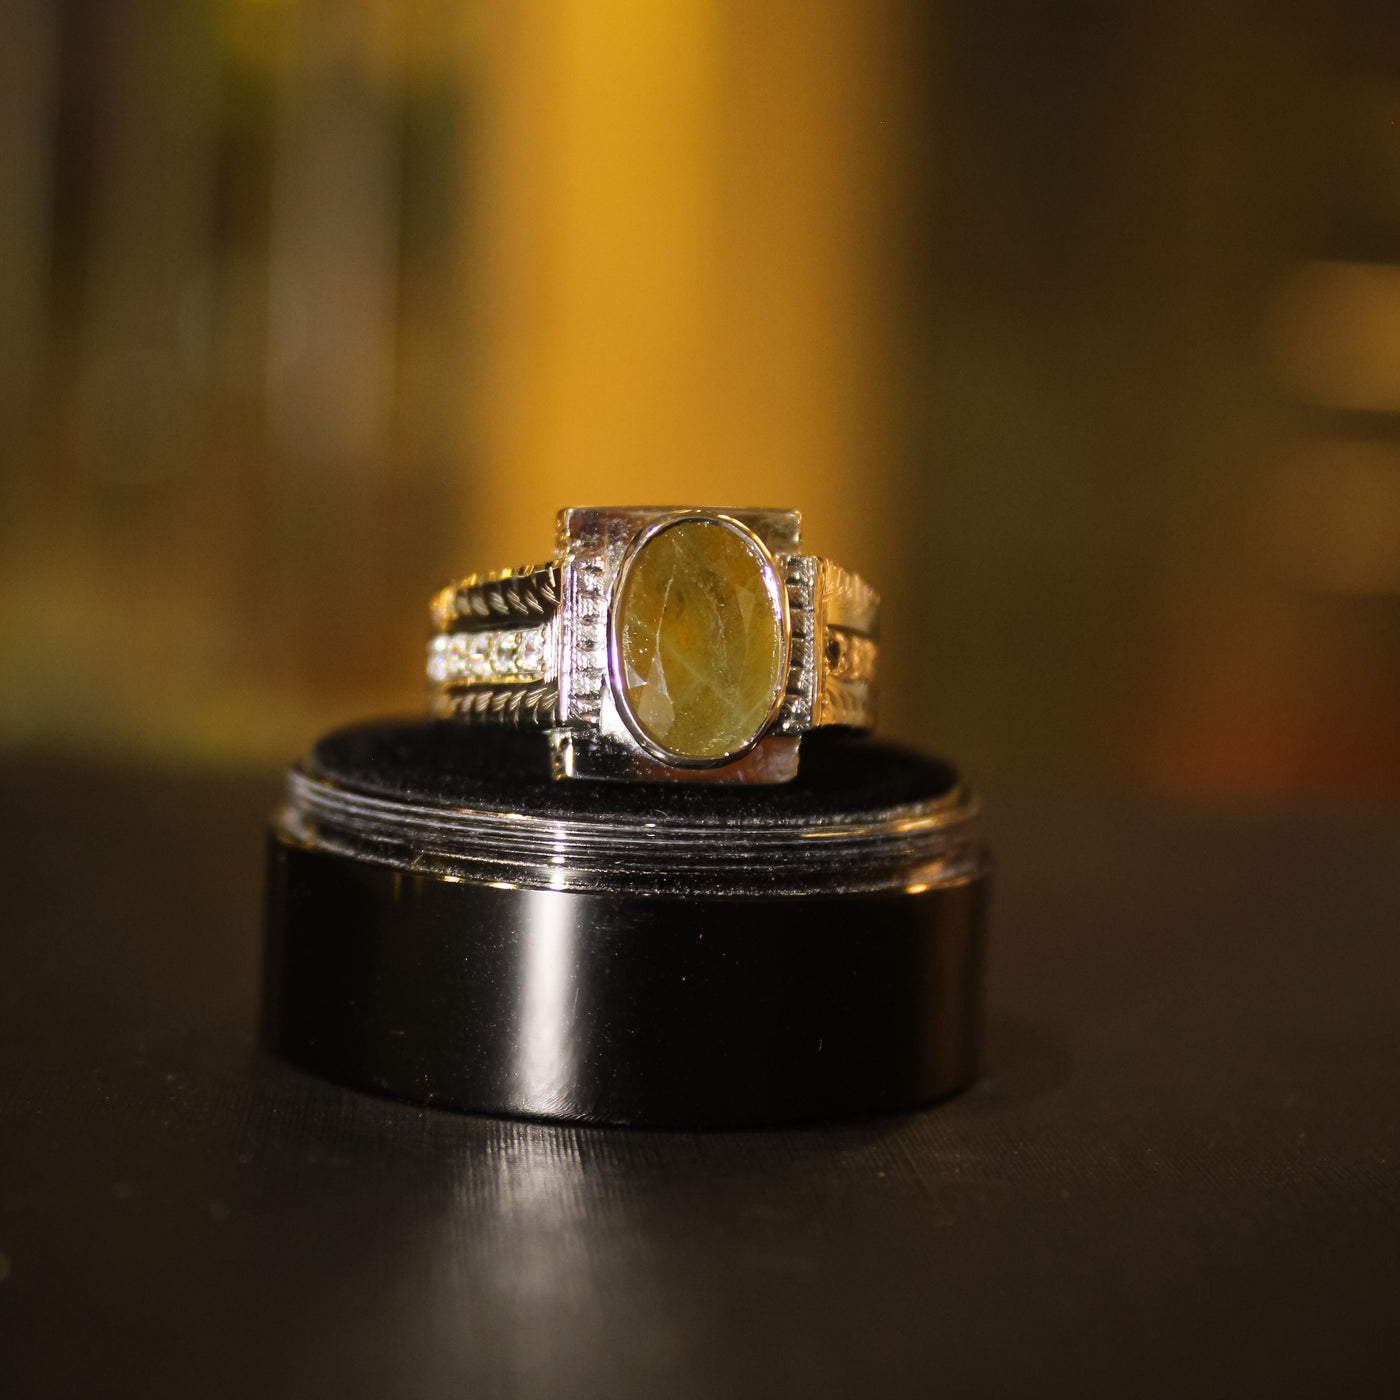 Buy a 5-carat Yellow Sapphire Women's Ring (with Lab Certificate)